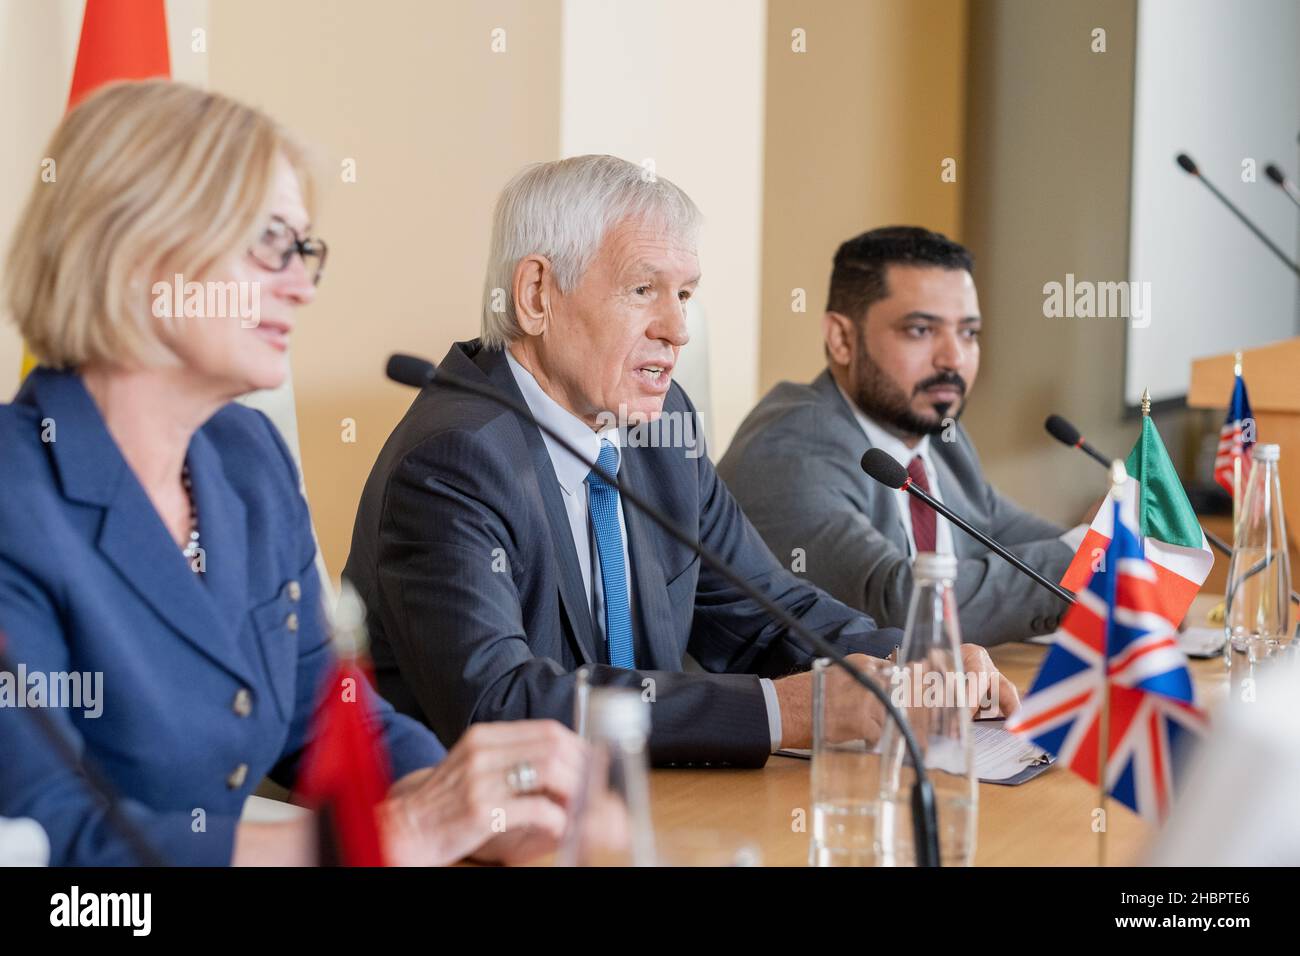 Confident senior politician in formalwear speaking at conference while sitting among his colleagues from foreign countries Stock Photo